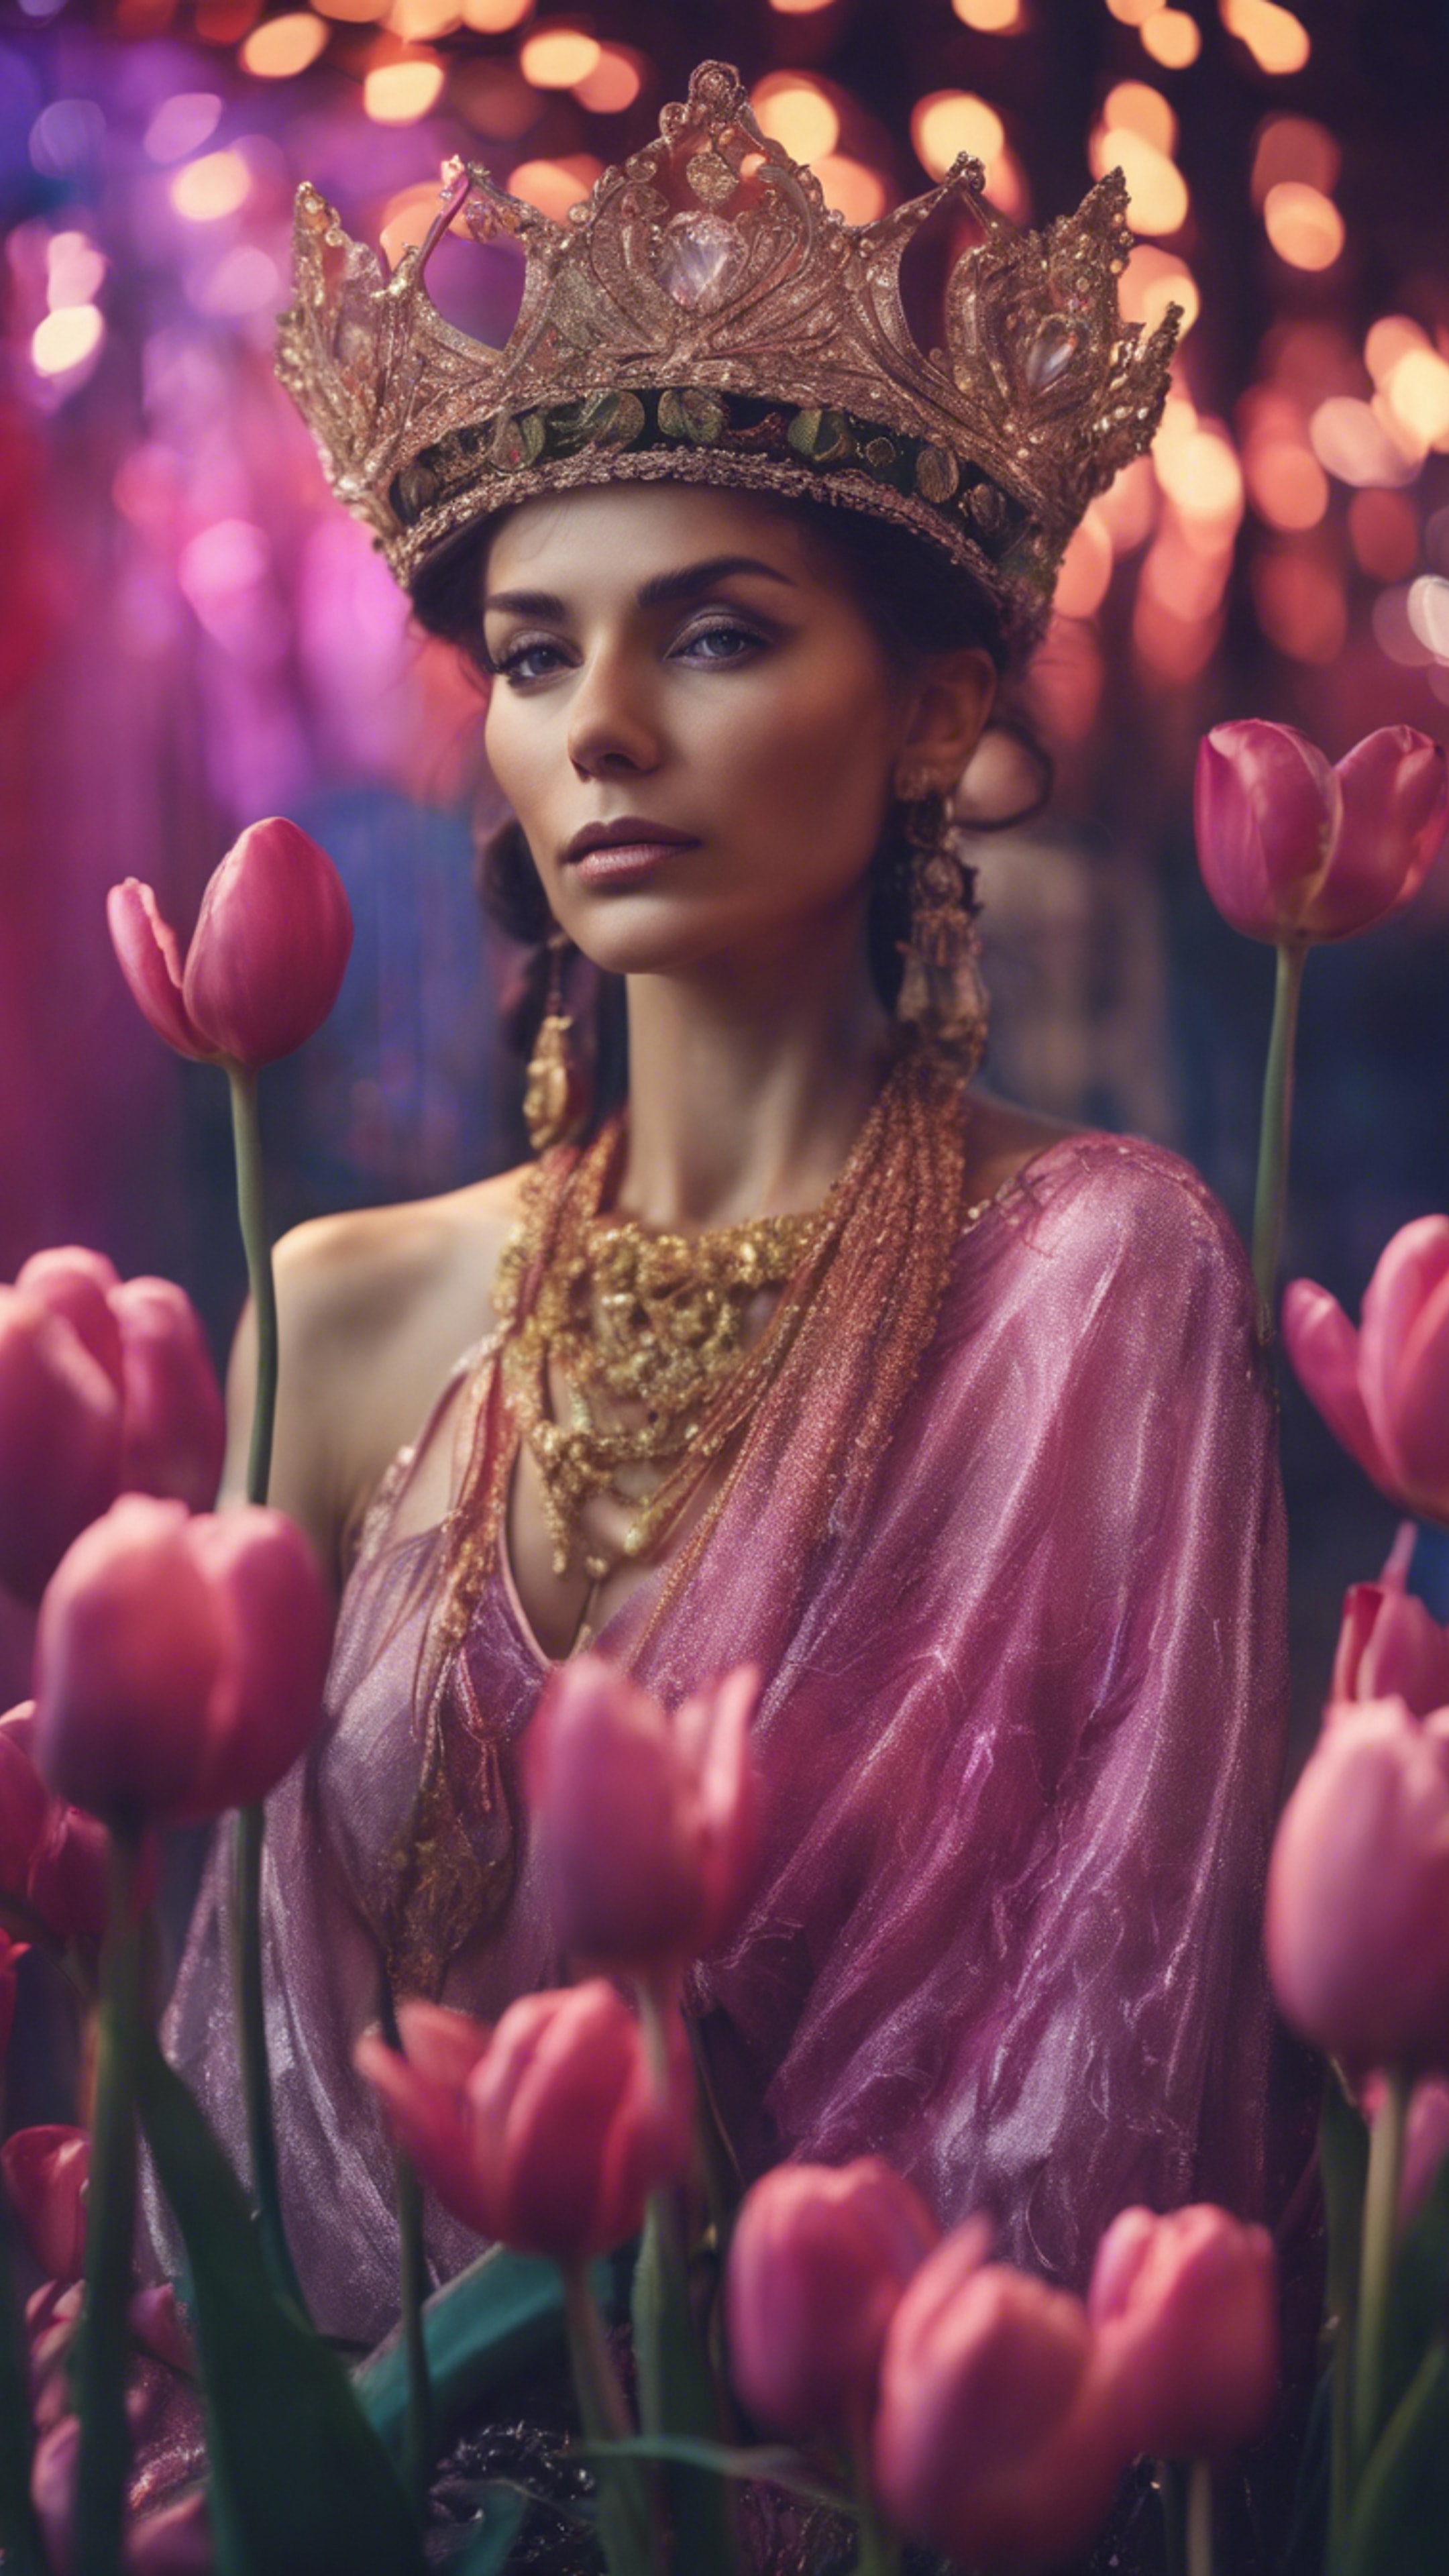 A beautiful mystic woman wearing a crown made of neon tulips.壁紙[660170d197cd4563a83b]